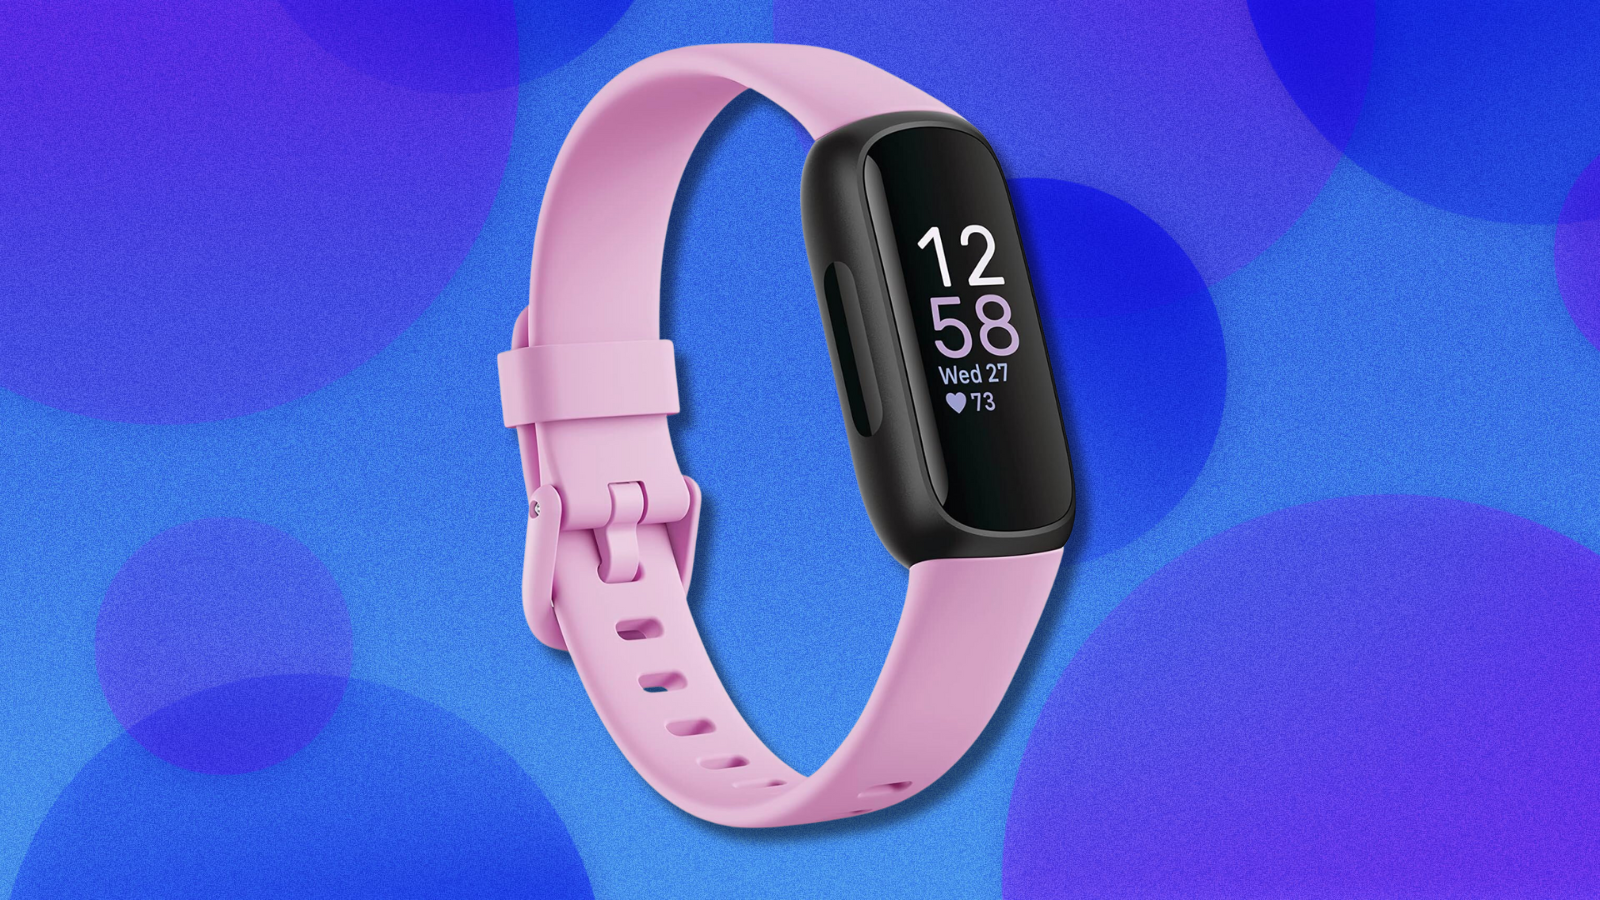 Fitbit Inspire 3 on blue and purple abstract background